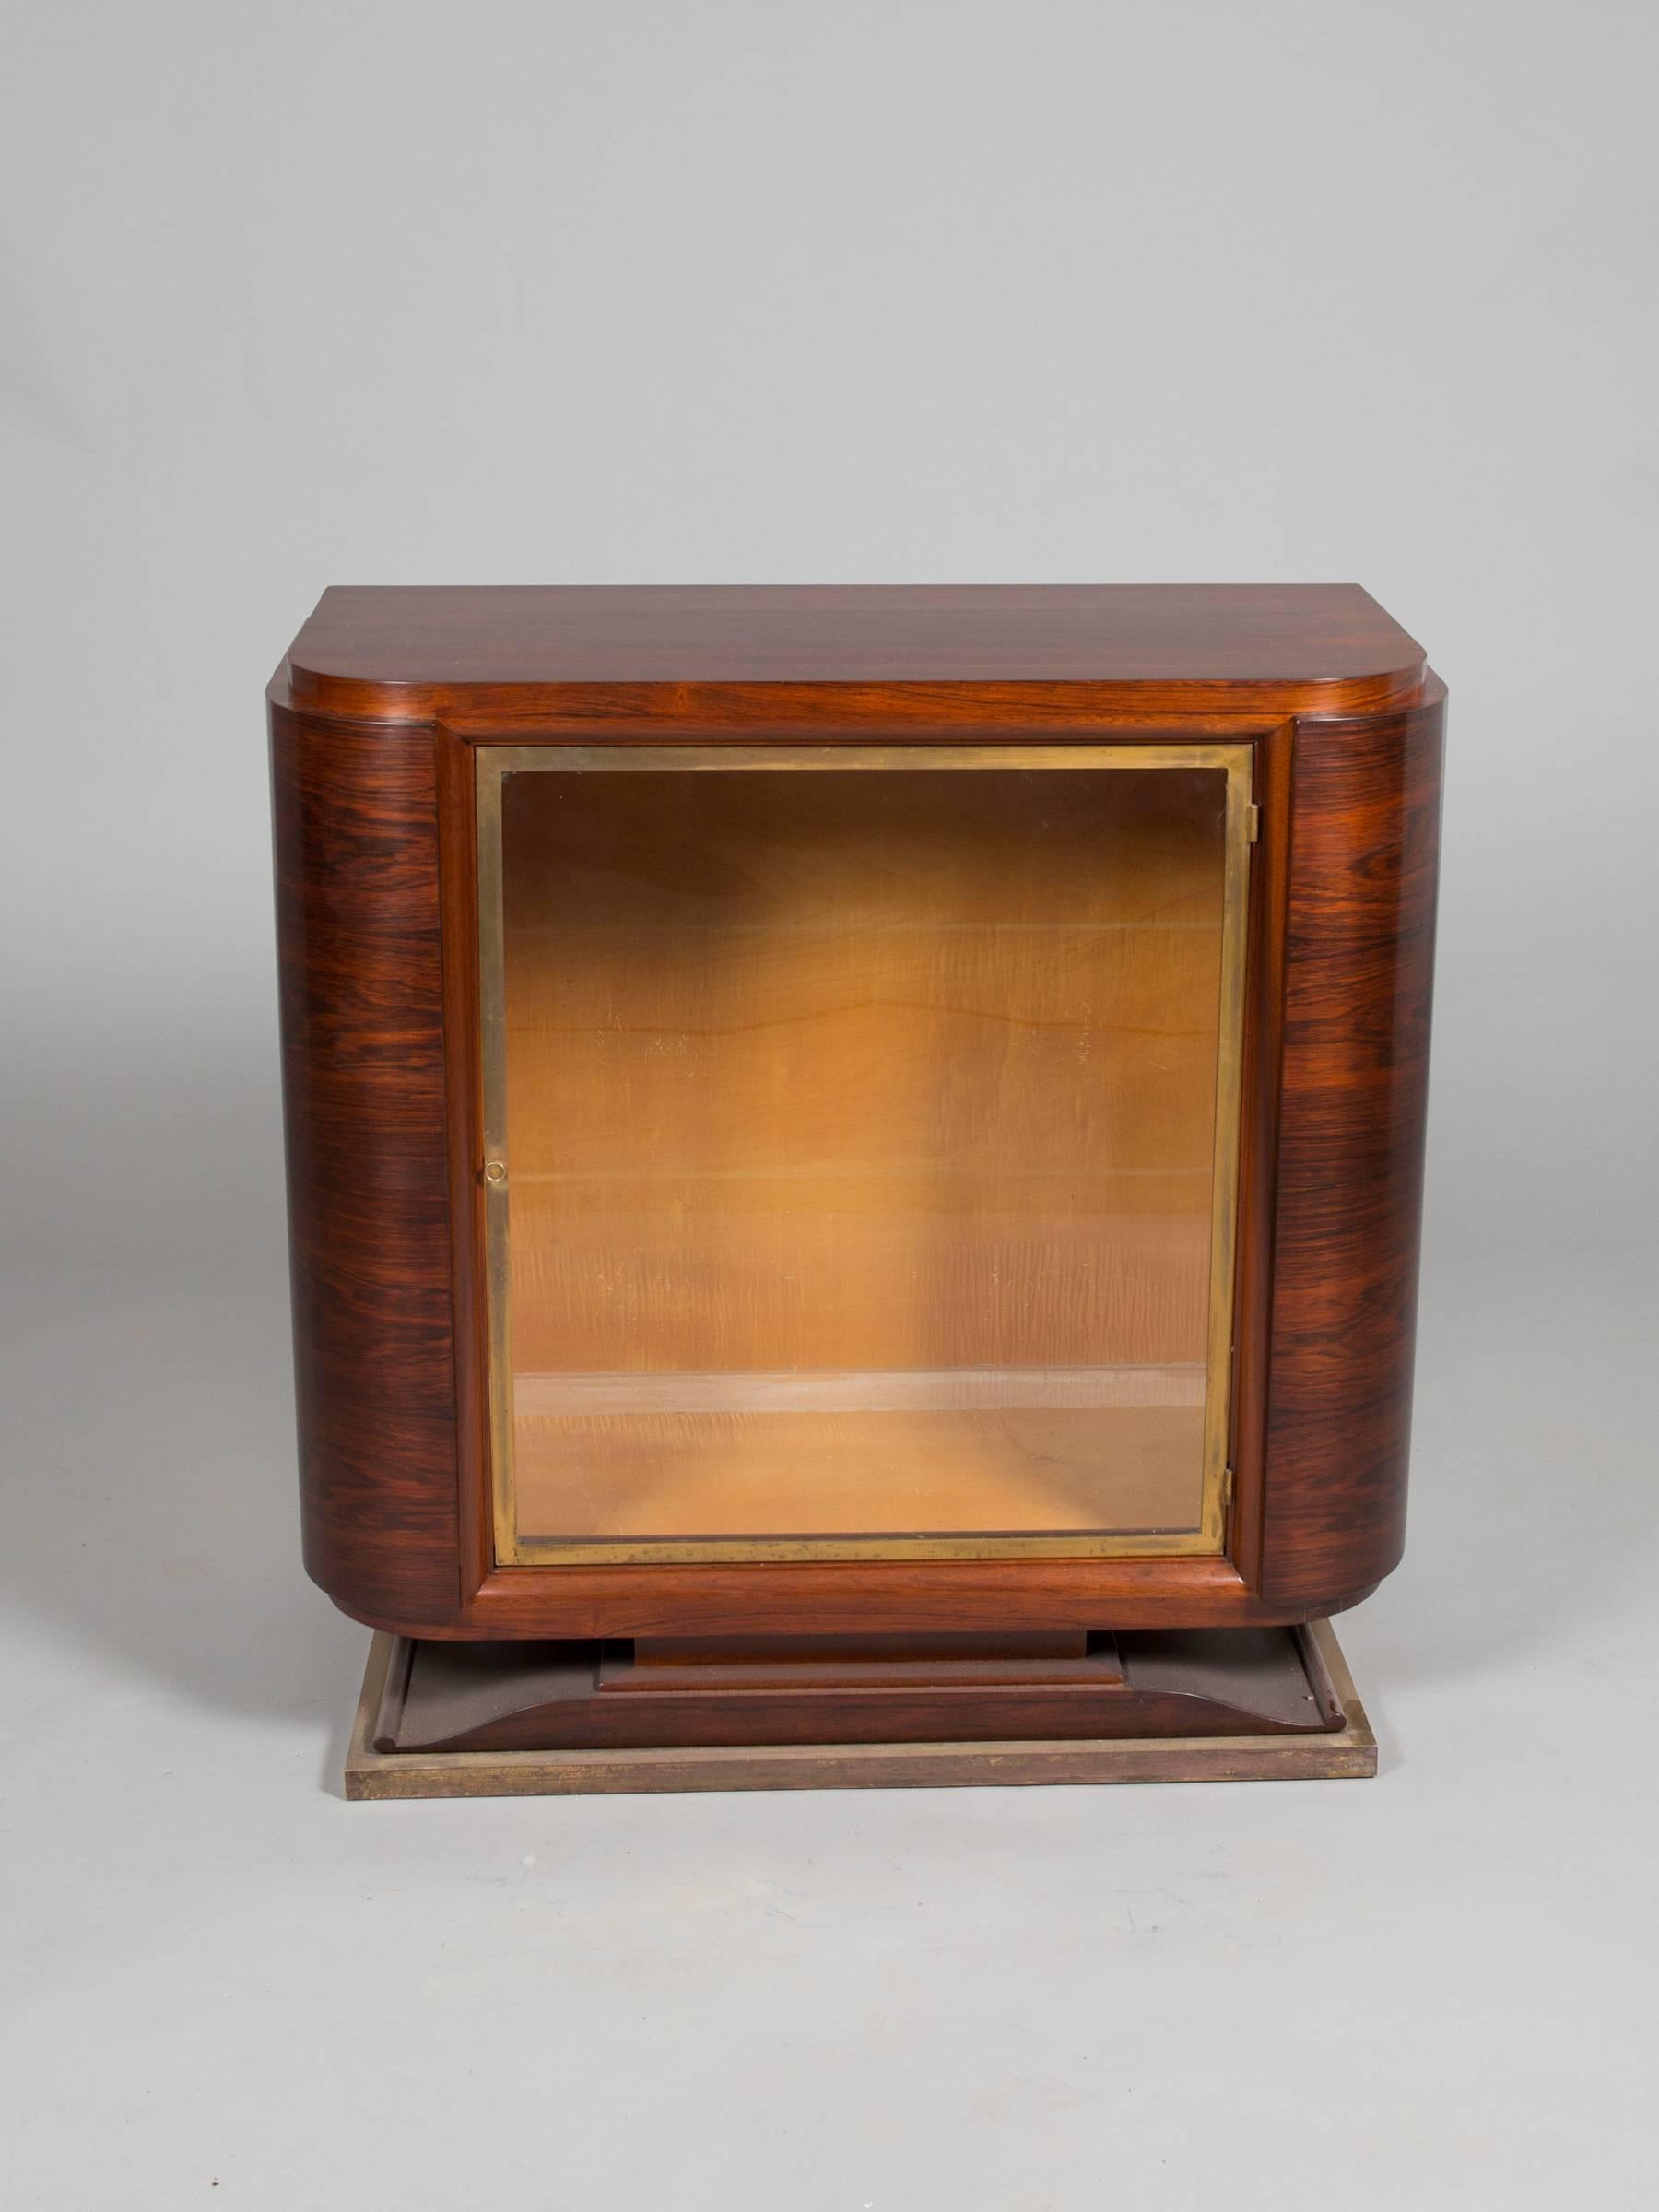 Chic Art Deco glass door cabinet with brass detailing. Glass shelves to be provided if desired.